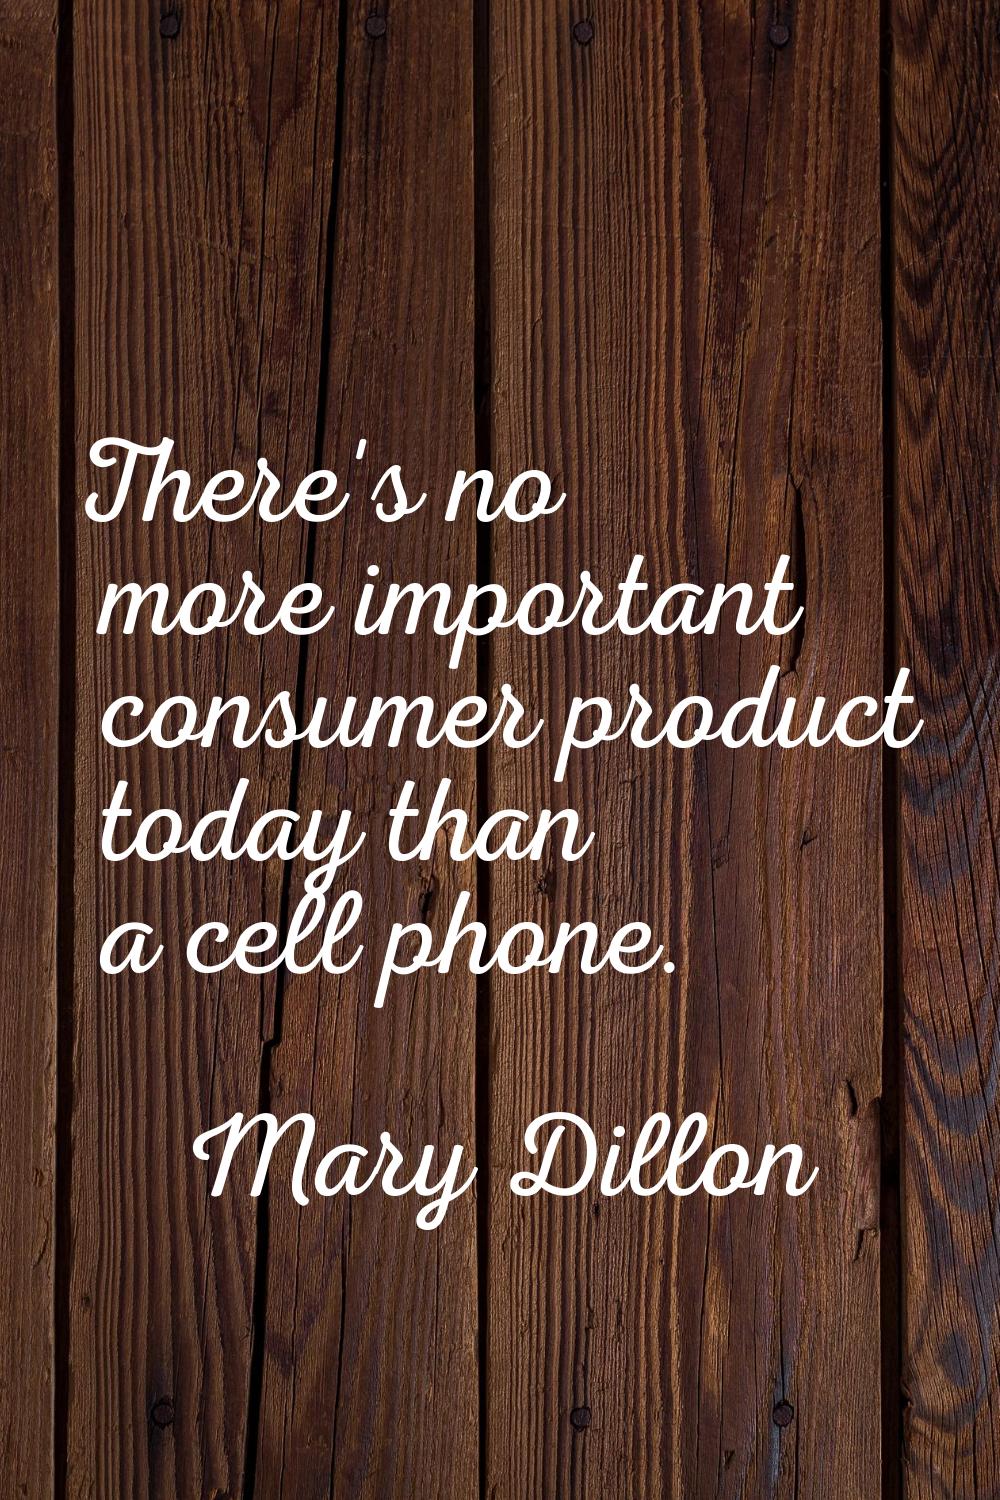 There's no more important consumer product today than a cell phone.